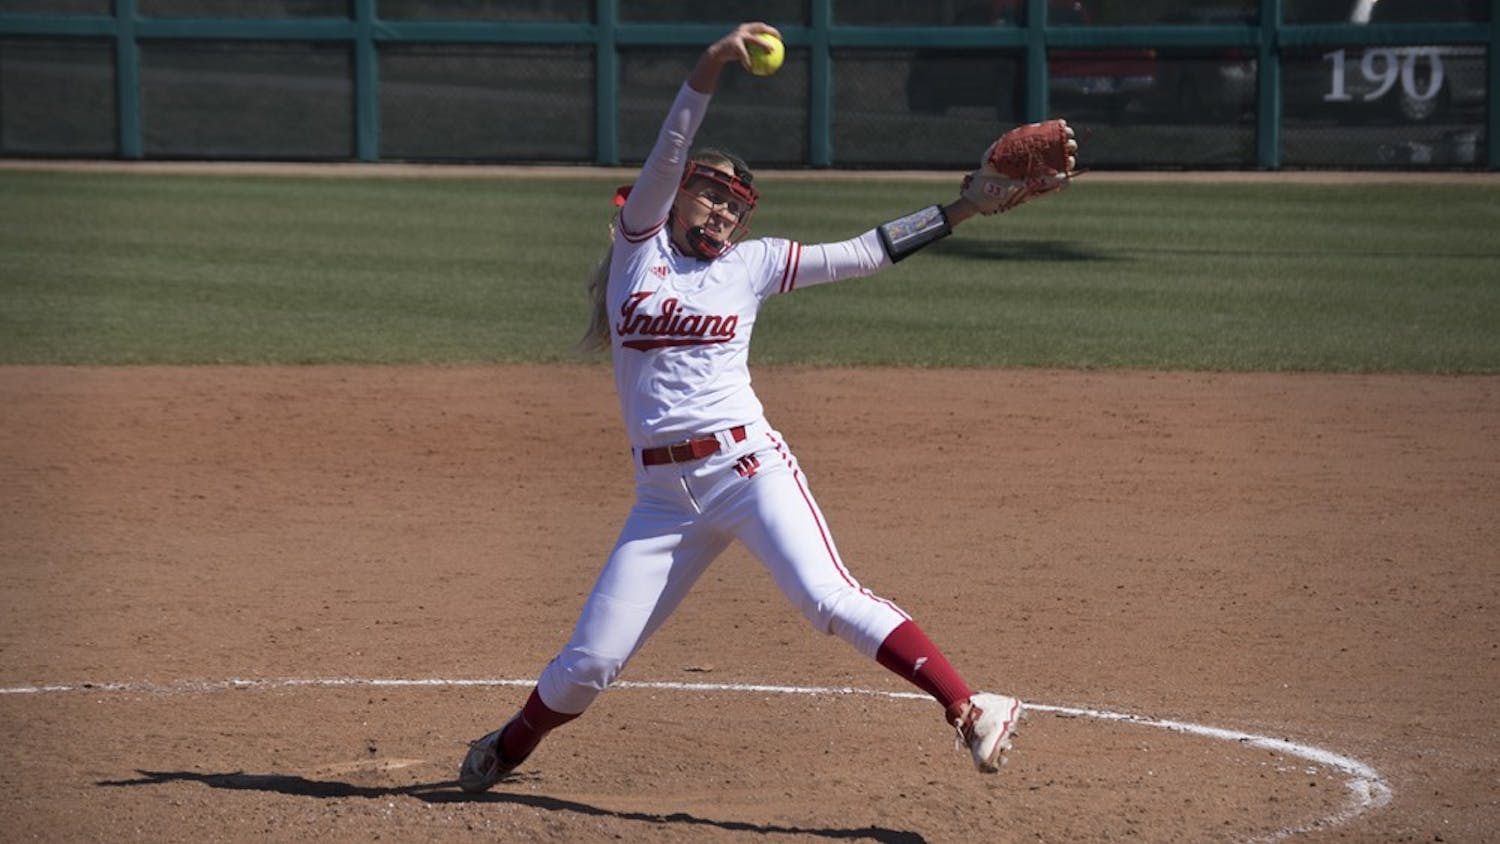 An IU softball team member pitches the ball. The Hoosiers took on the Scarlet Knights last weekend winning two games on Friday but lost on Saturday.